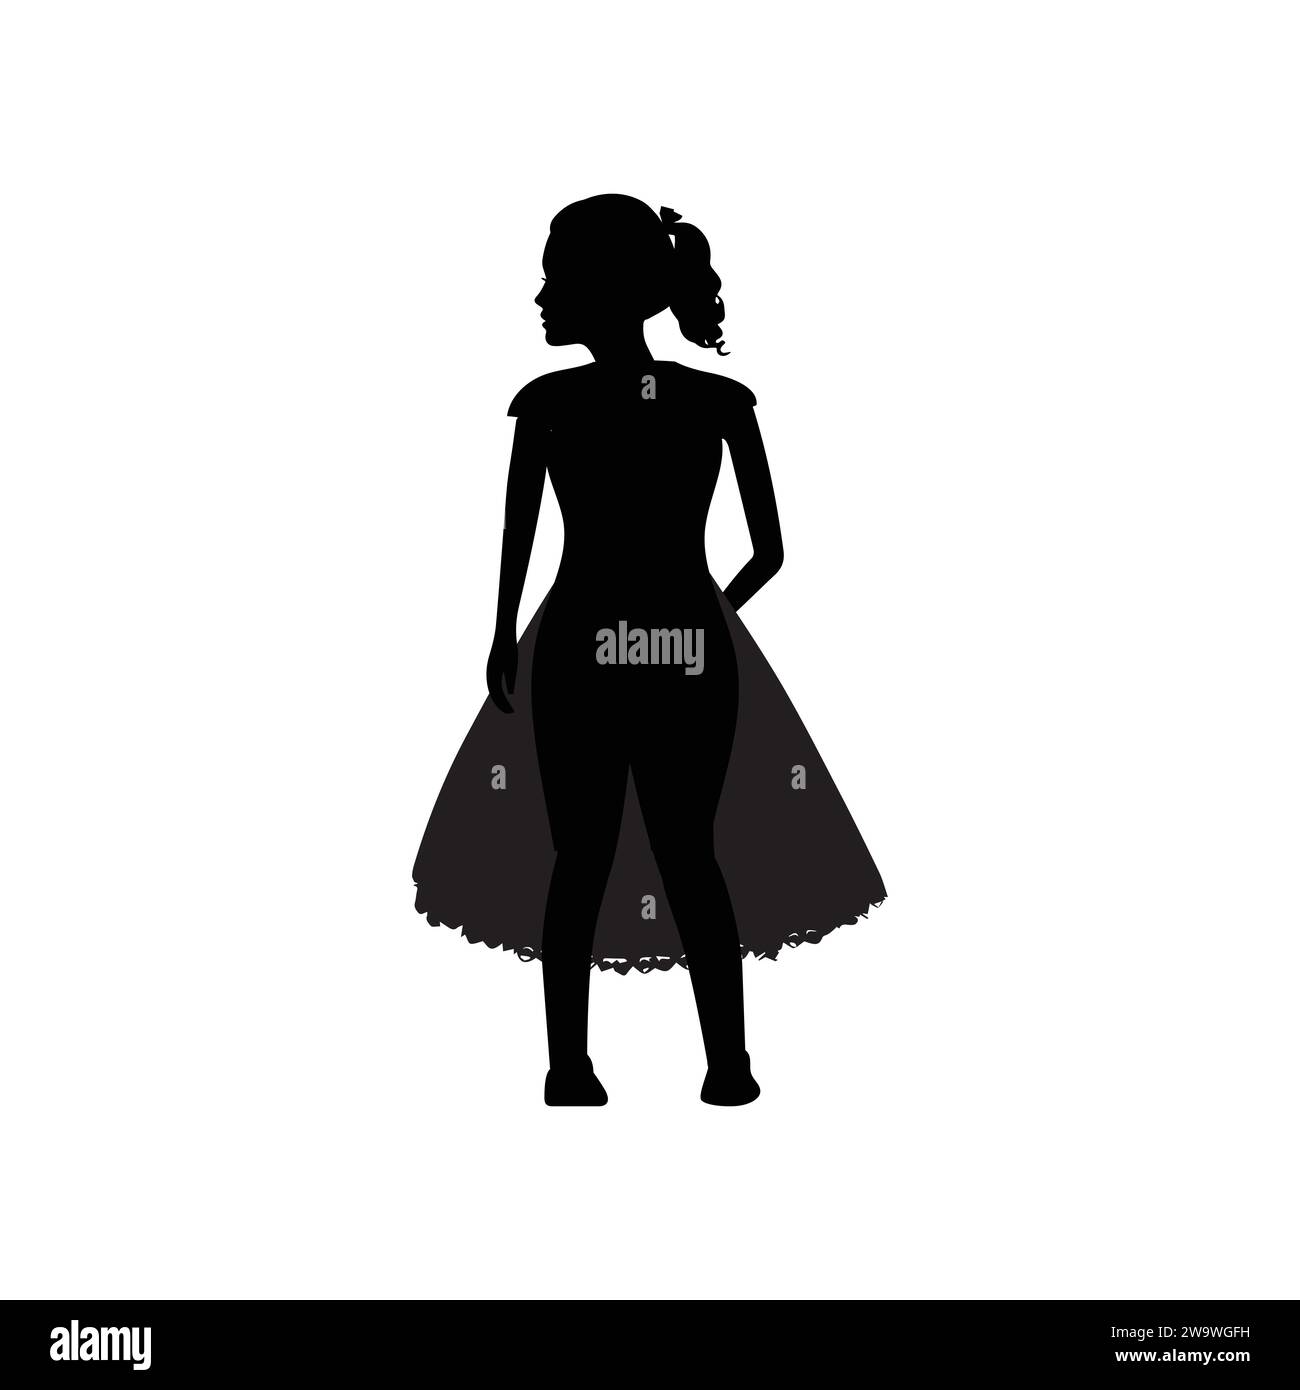 Man, Woman and kids standing silhouette. Group in formal dress. Shillouette romantic couple picture. Silhouettes of People. Stock Vector